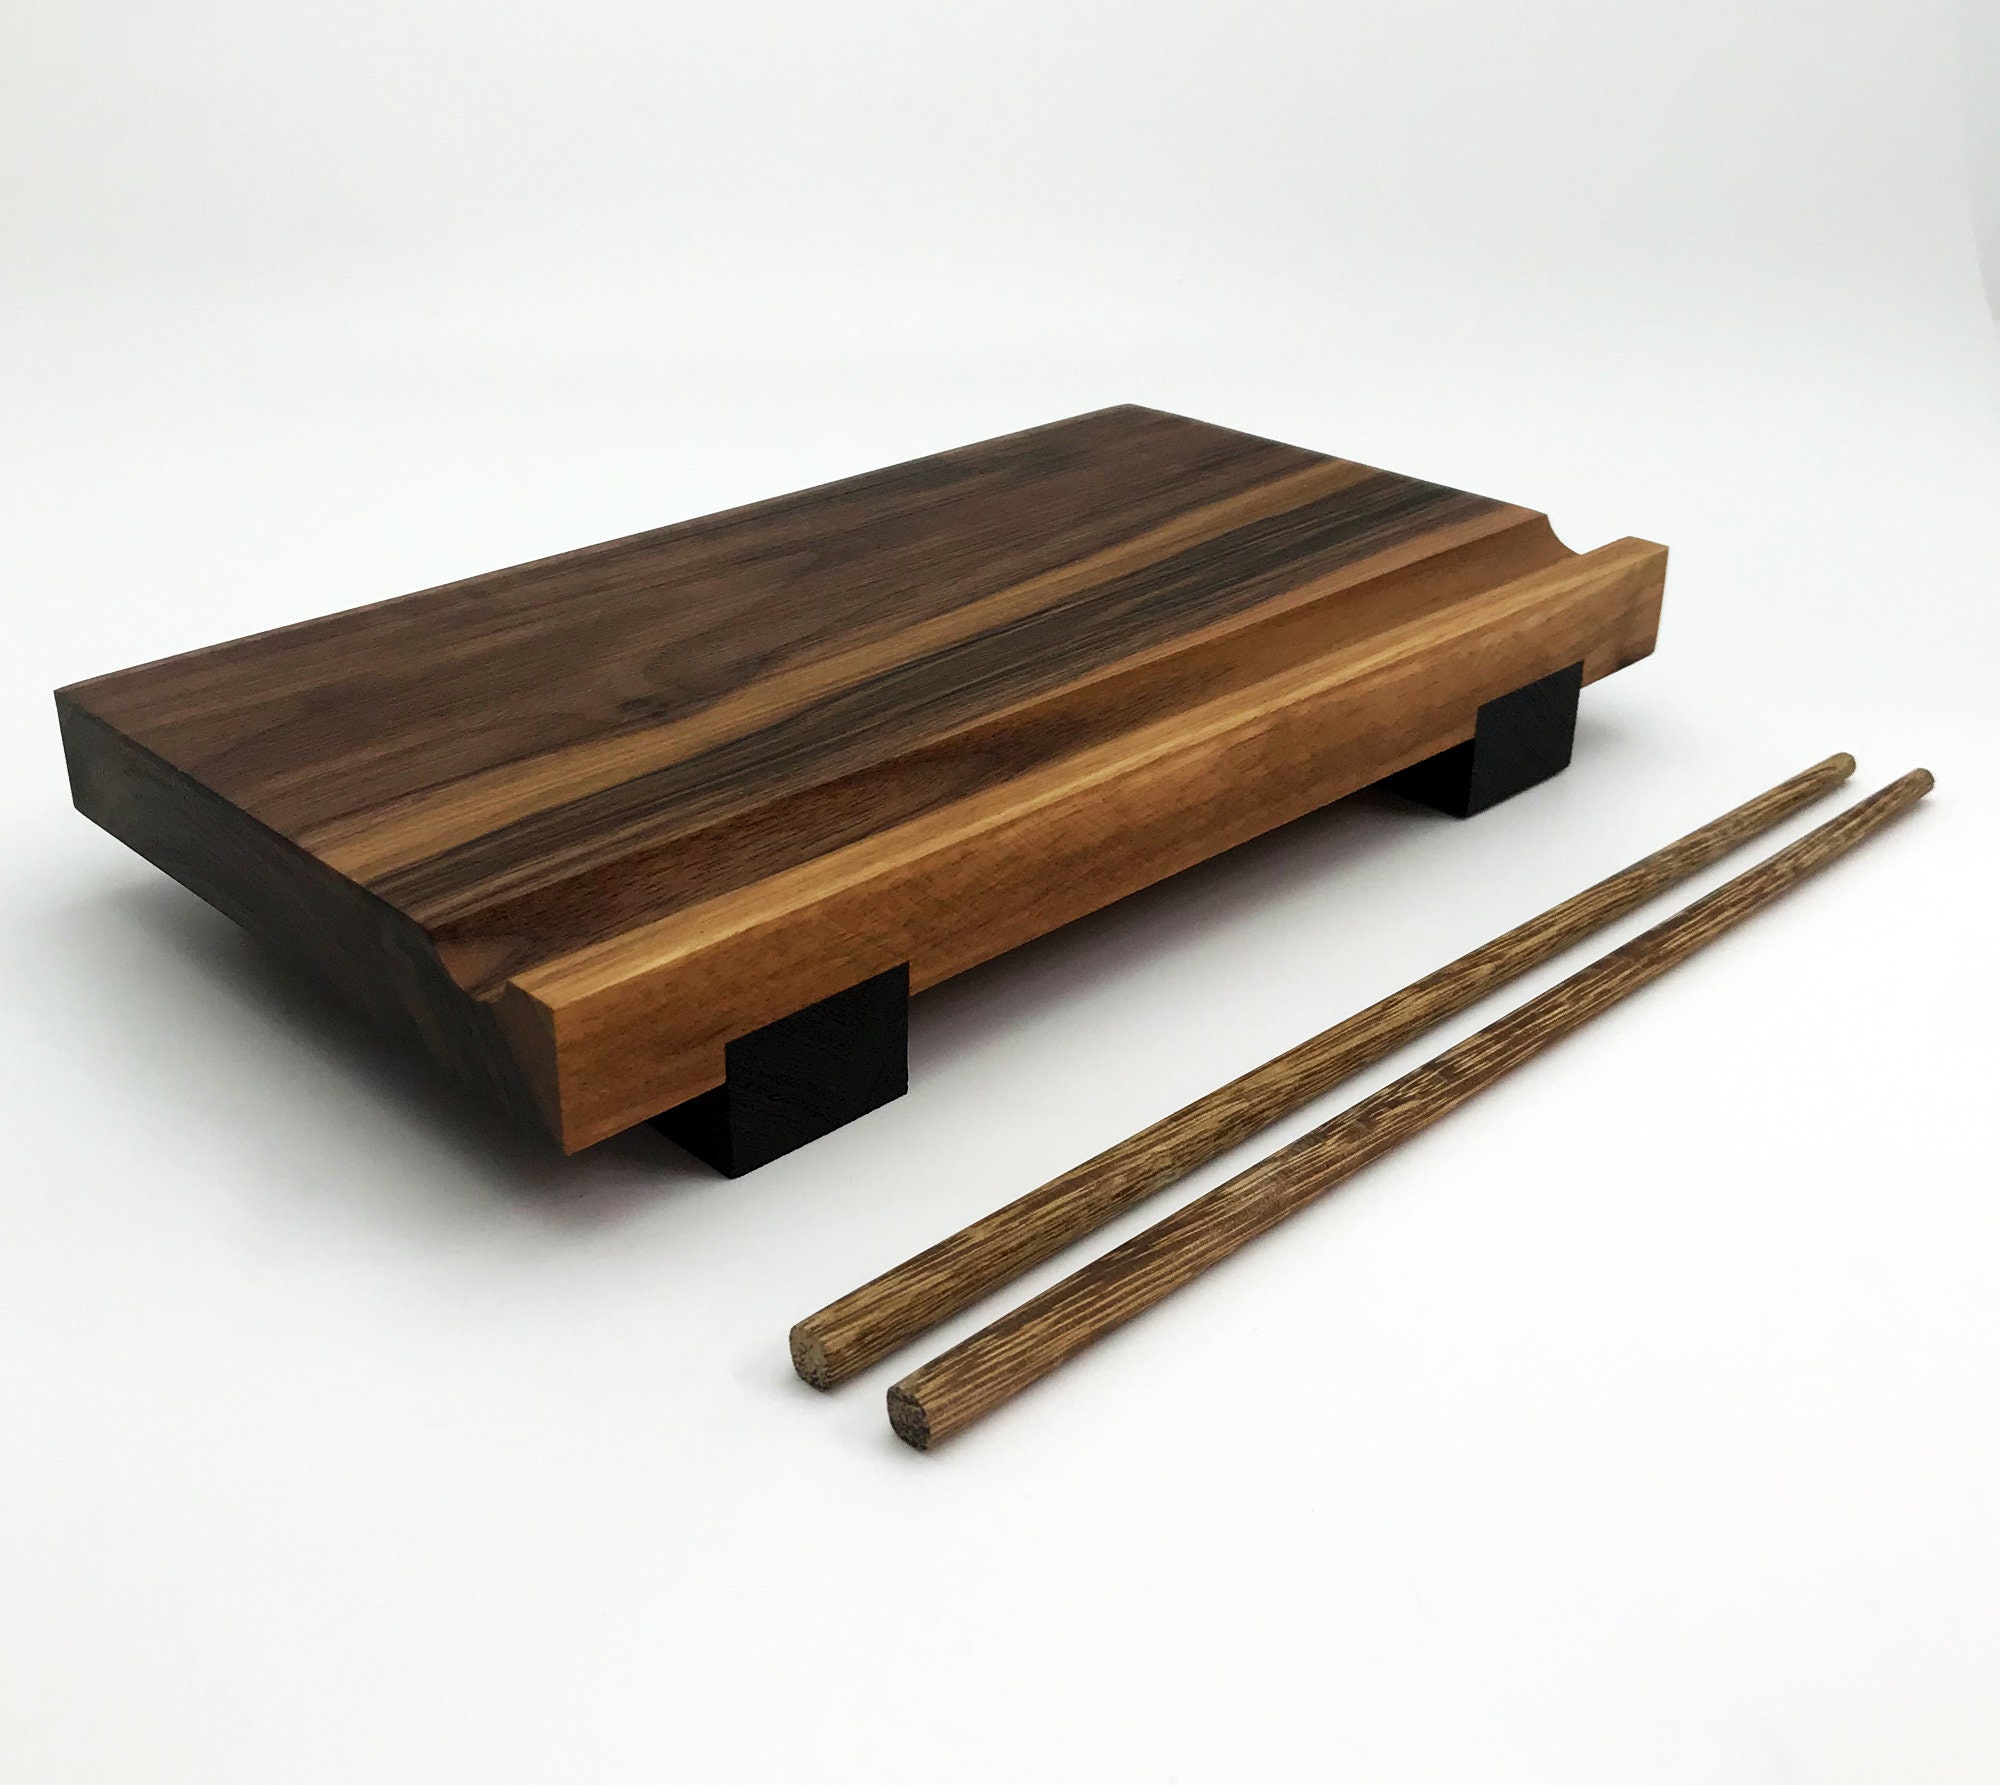 Sushi Board, Serving Board, Serving Tray, Sushi Plate, Walnut Wooden Plate,  Anniversary Gift 